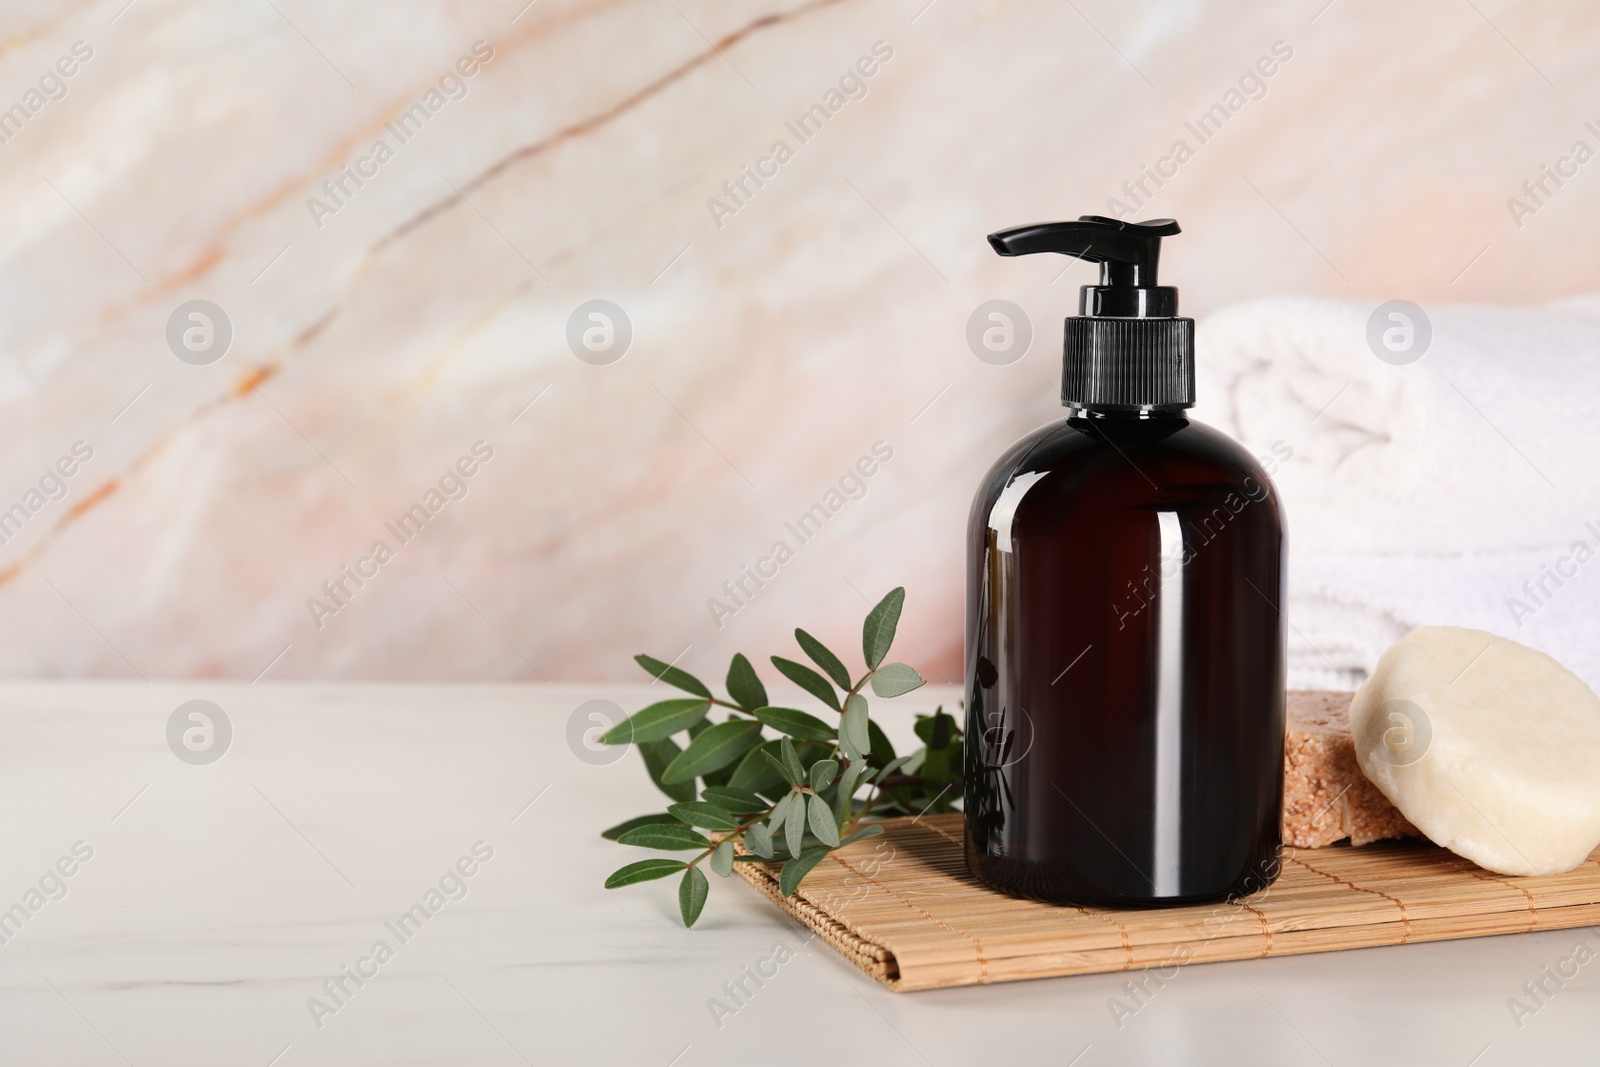 Photo of Shampoo bottle, solid shampoo bars and folded towels on white marble table, space for text